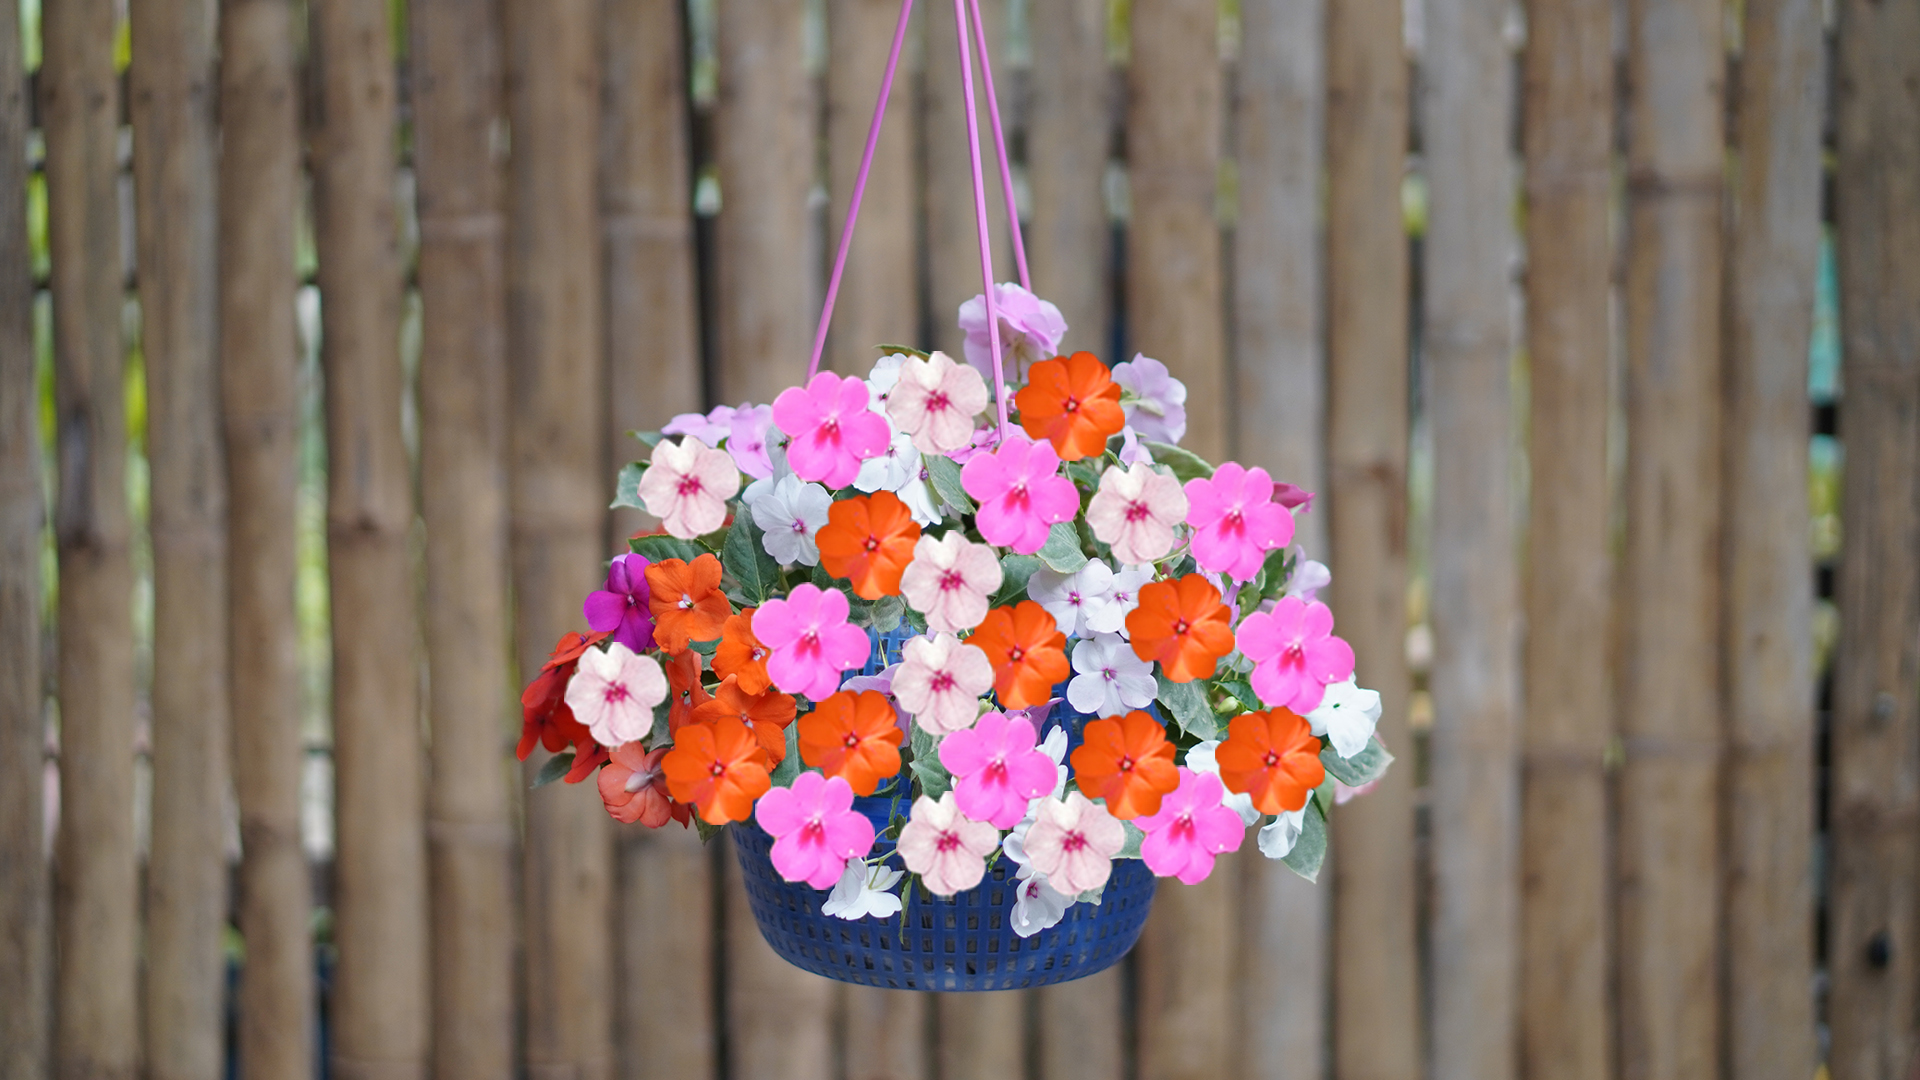 Creative Hanging Garden Ideas To Plant Beautiful Flowers For The Garden